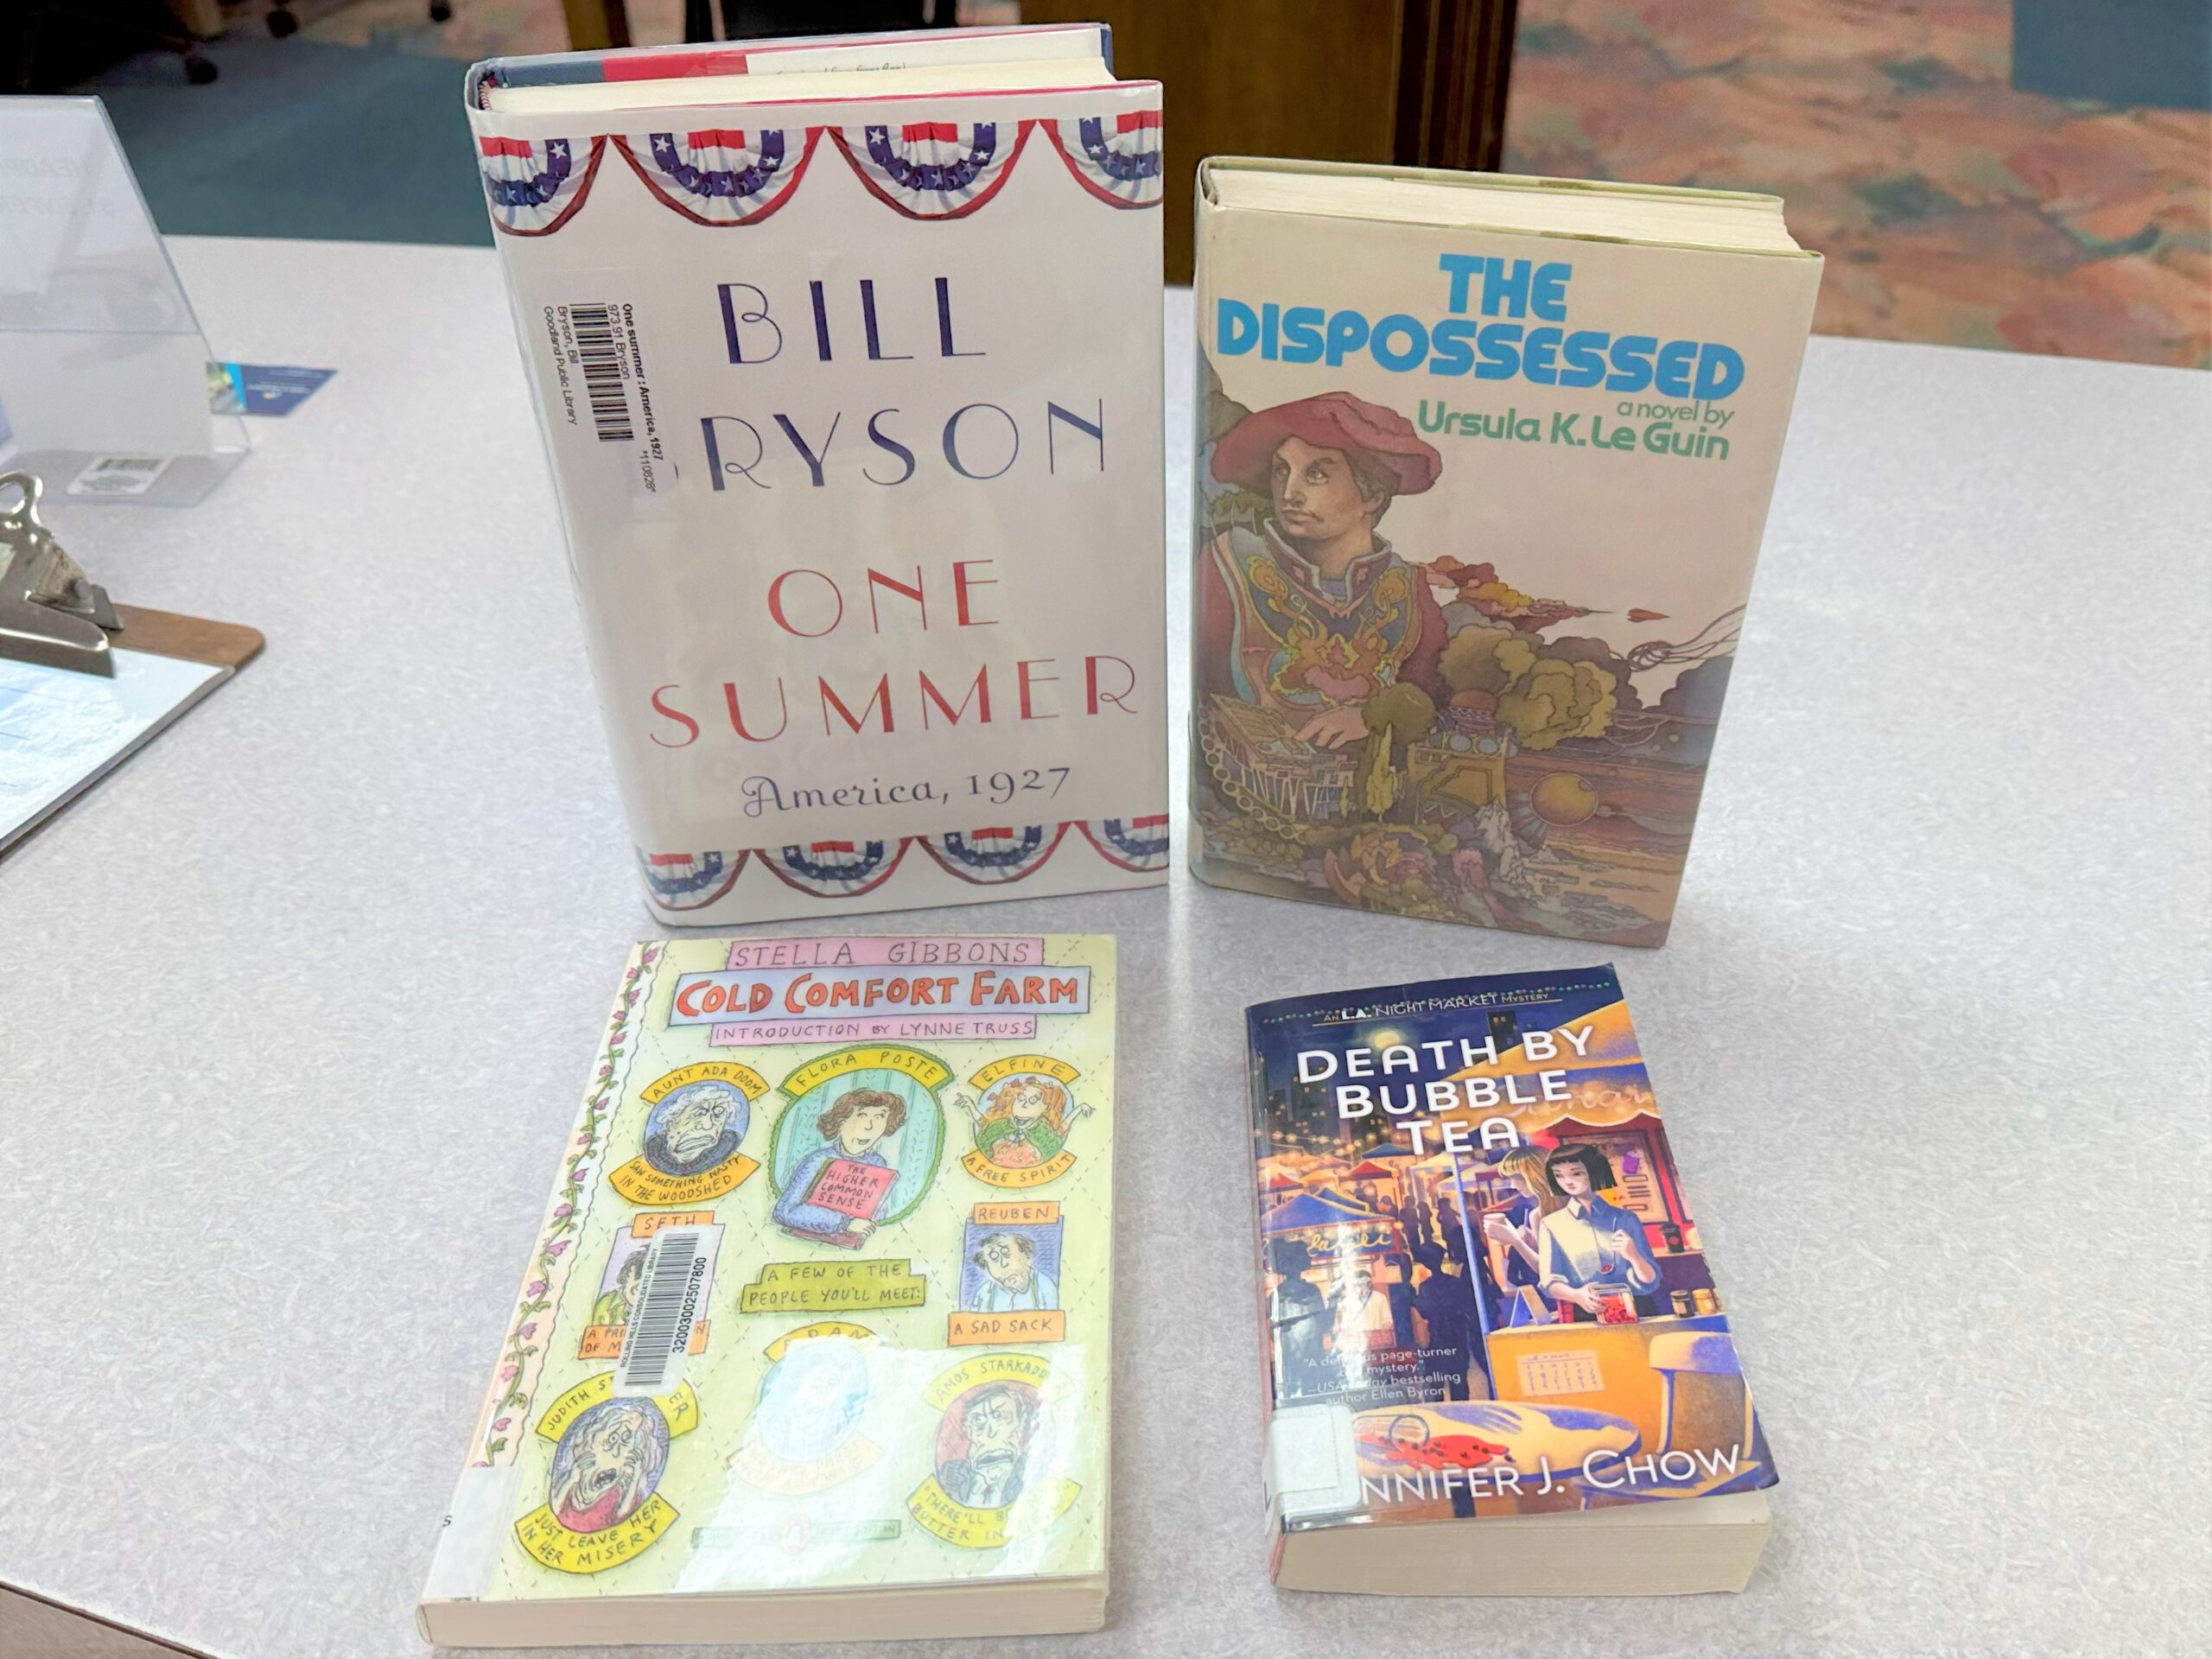 Four books are displayed on a counter: "The Dispossessed," "Cold Comfort Farm," "One Summer: America, 1927," and "Death by Bubble Tea."